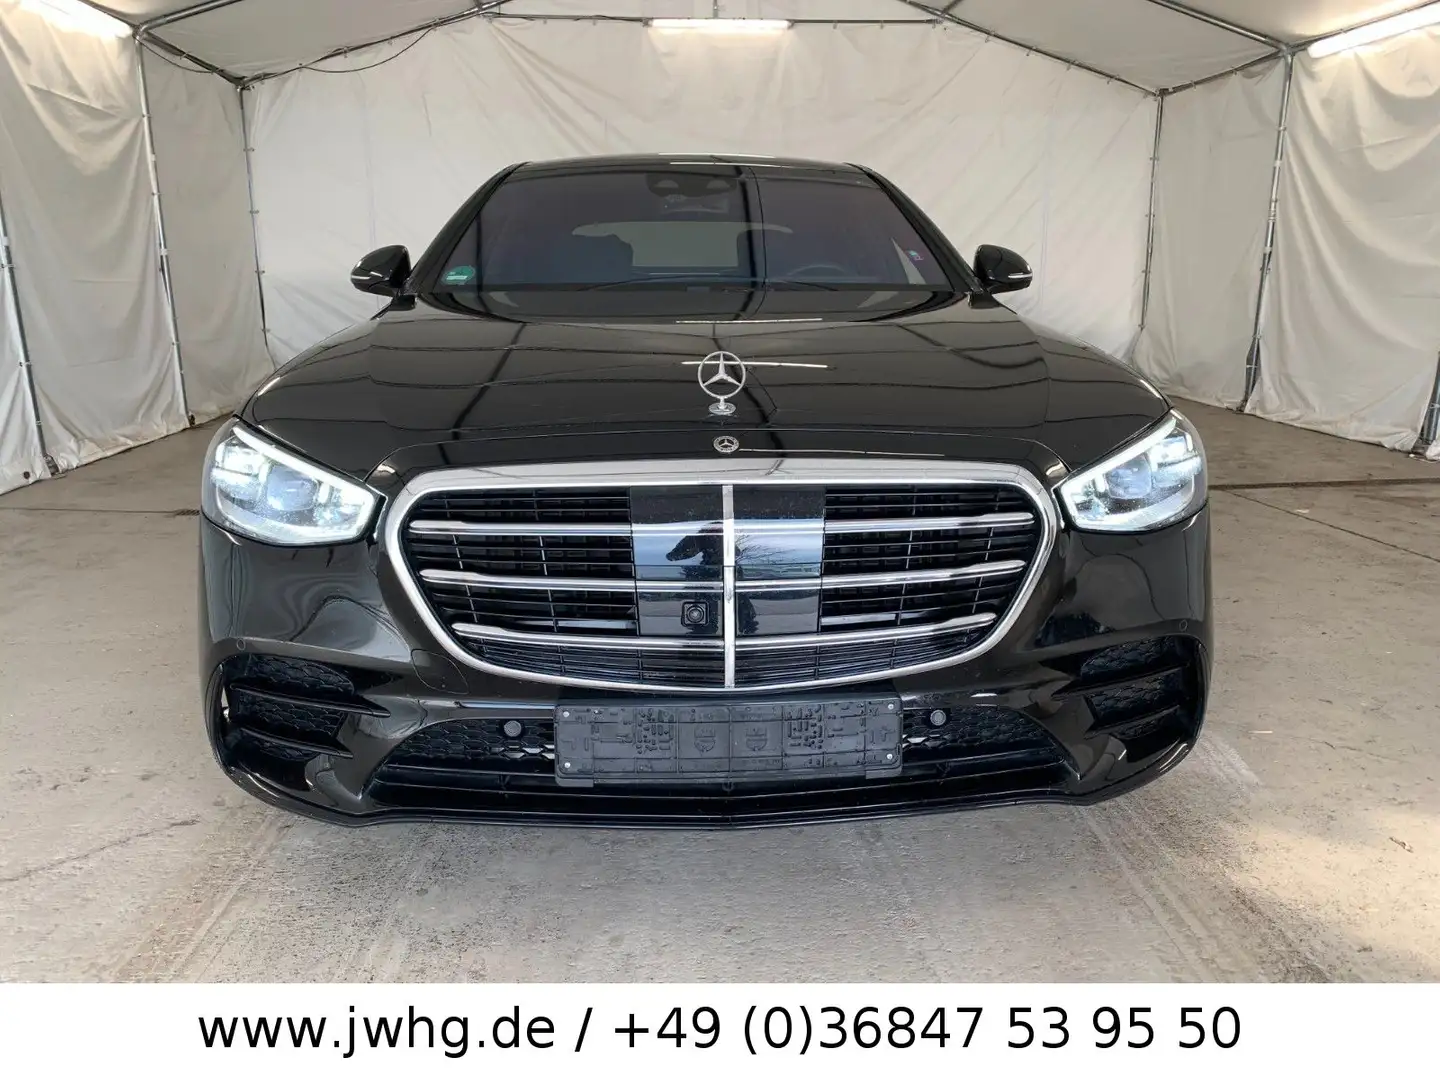 Mercedes-Benz S 580 S580Lang 4M AMG Line Voll UVP 170T€ Chauffer 21" crna - 2